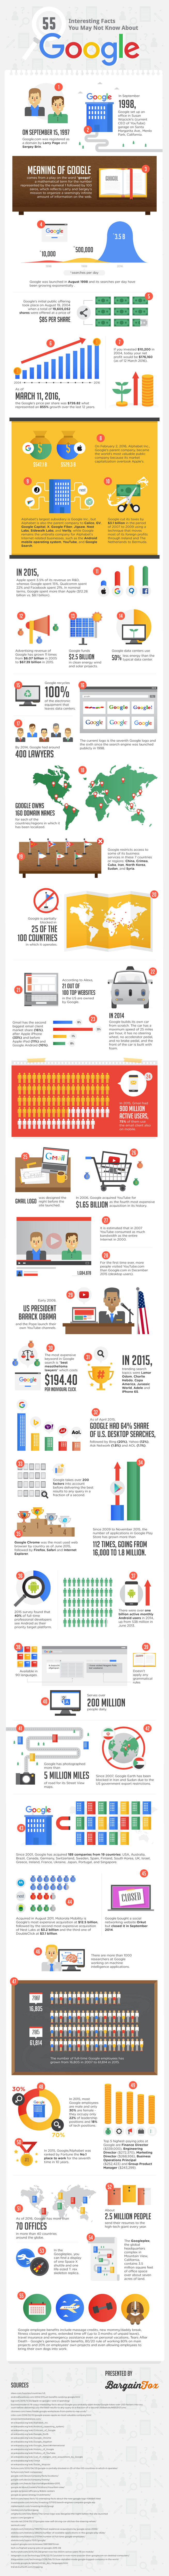 Interesting facts you may not know about Google